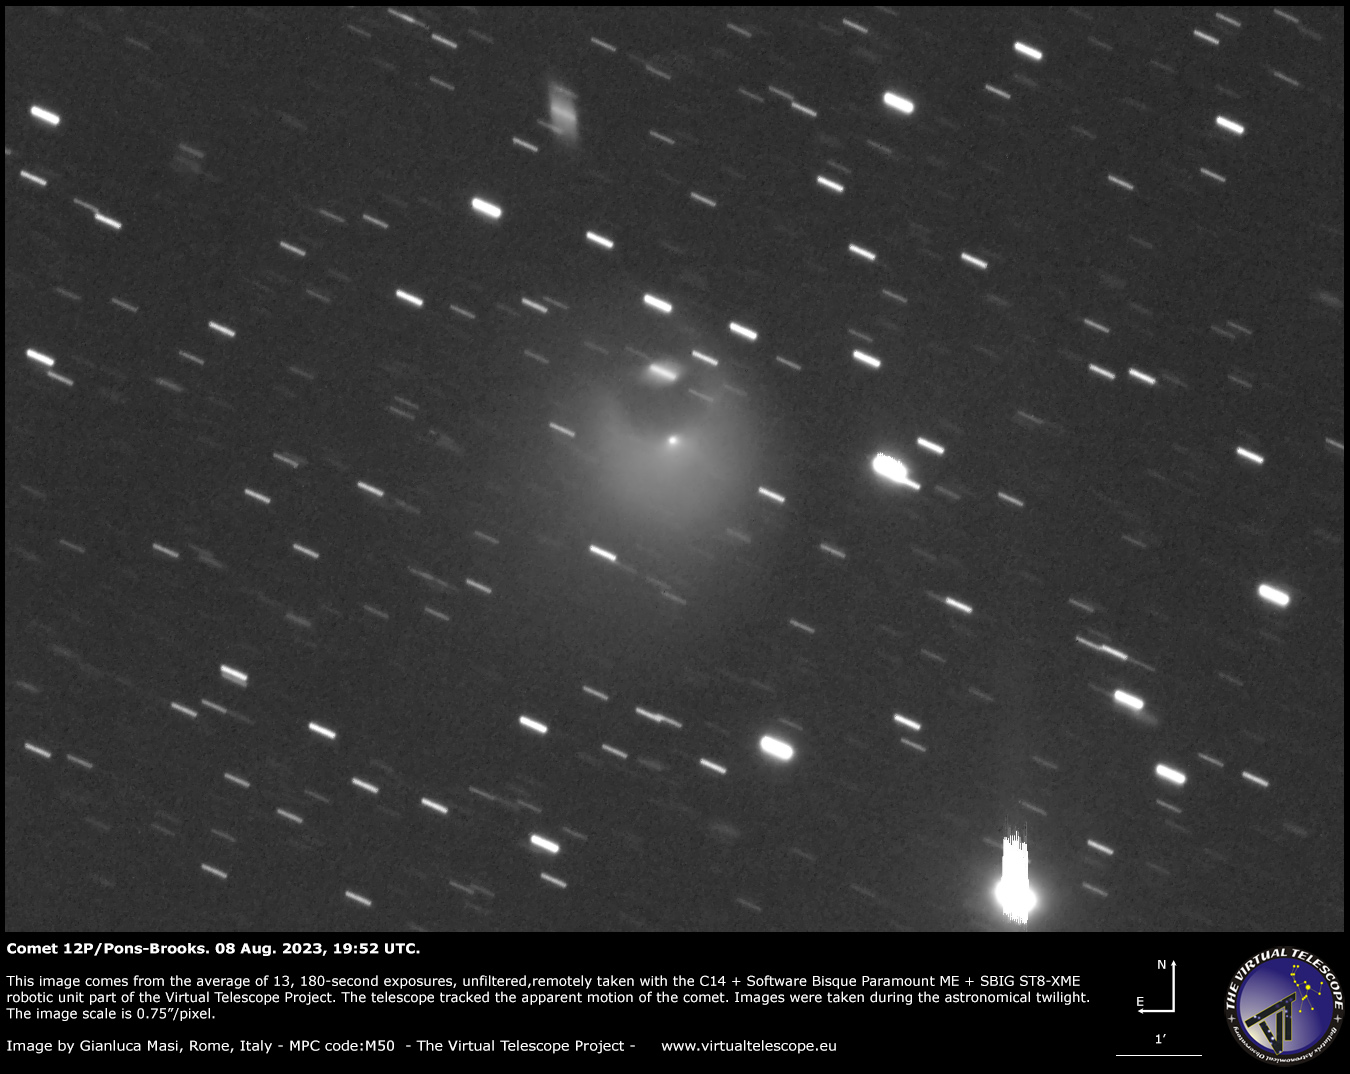 Comet 12P/Pons-Brooks: a new image - 8 Aug. 2023 - The Virtual ...